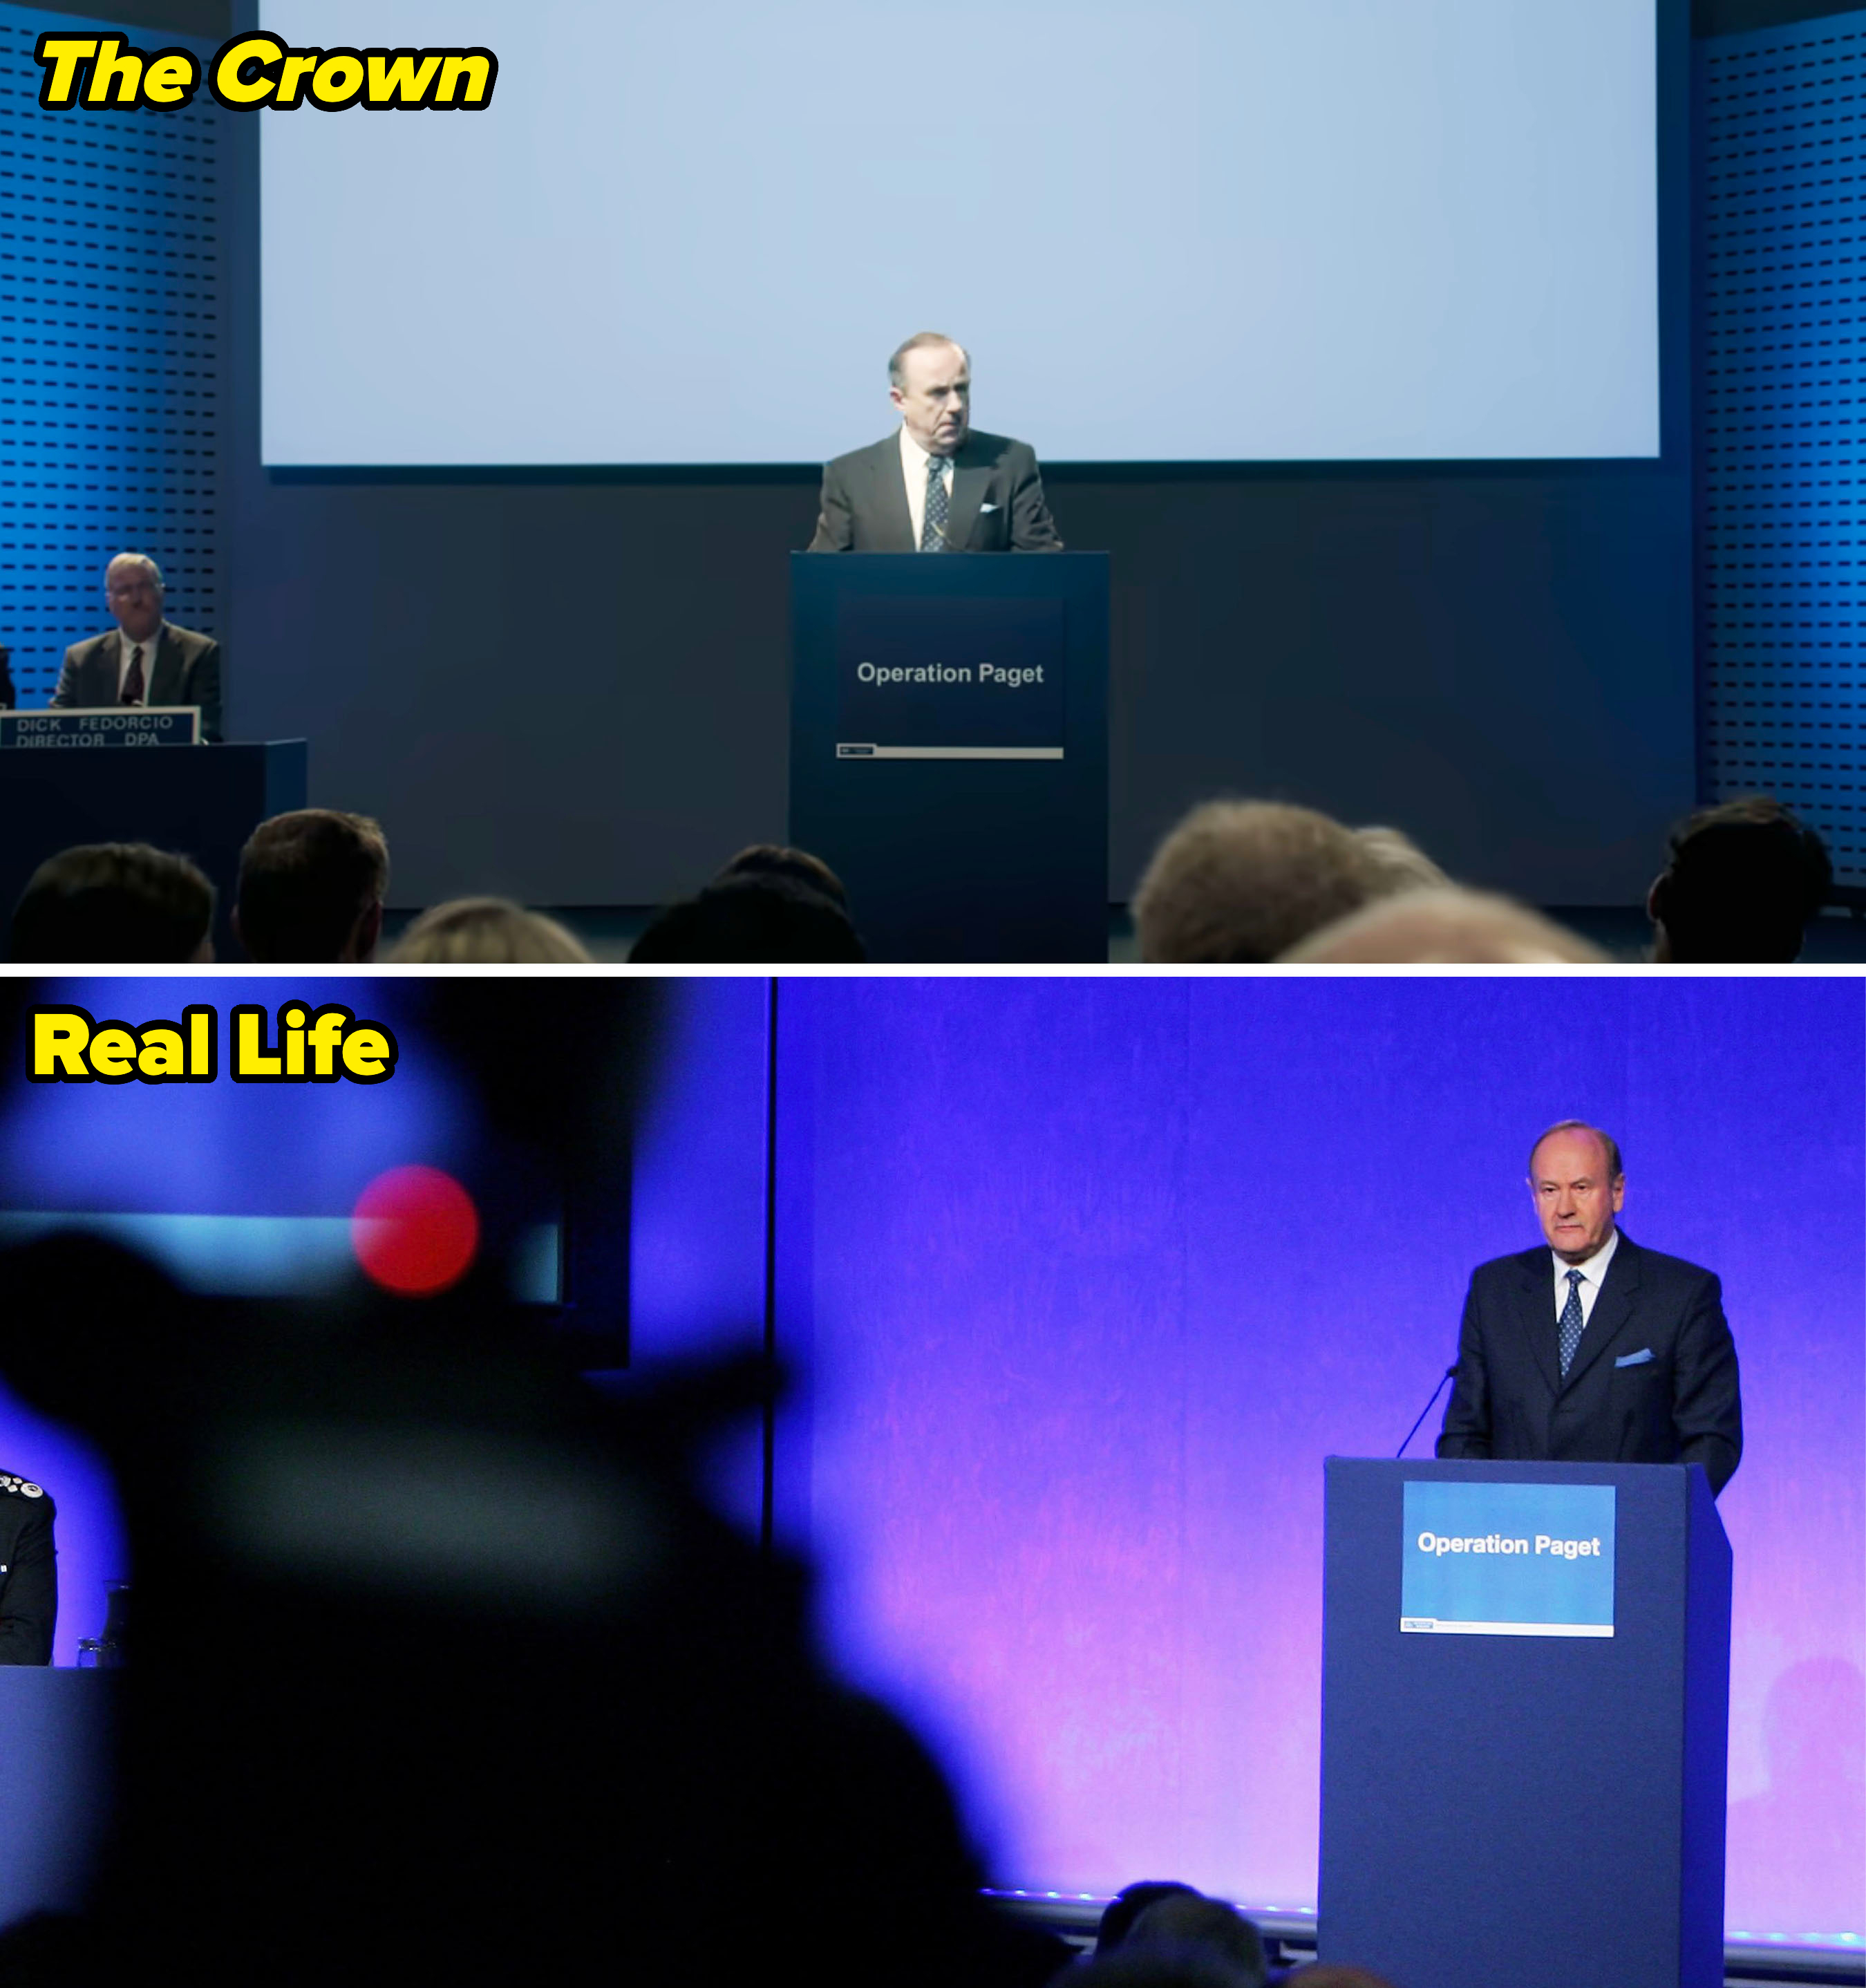 Lord Stevens in real life vs. &quot;The Crown&quot;